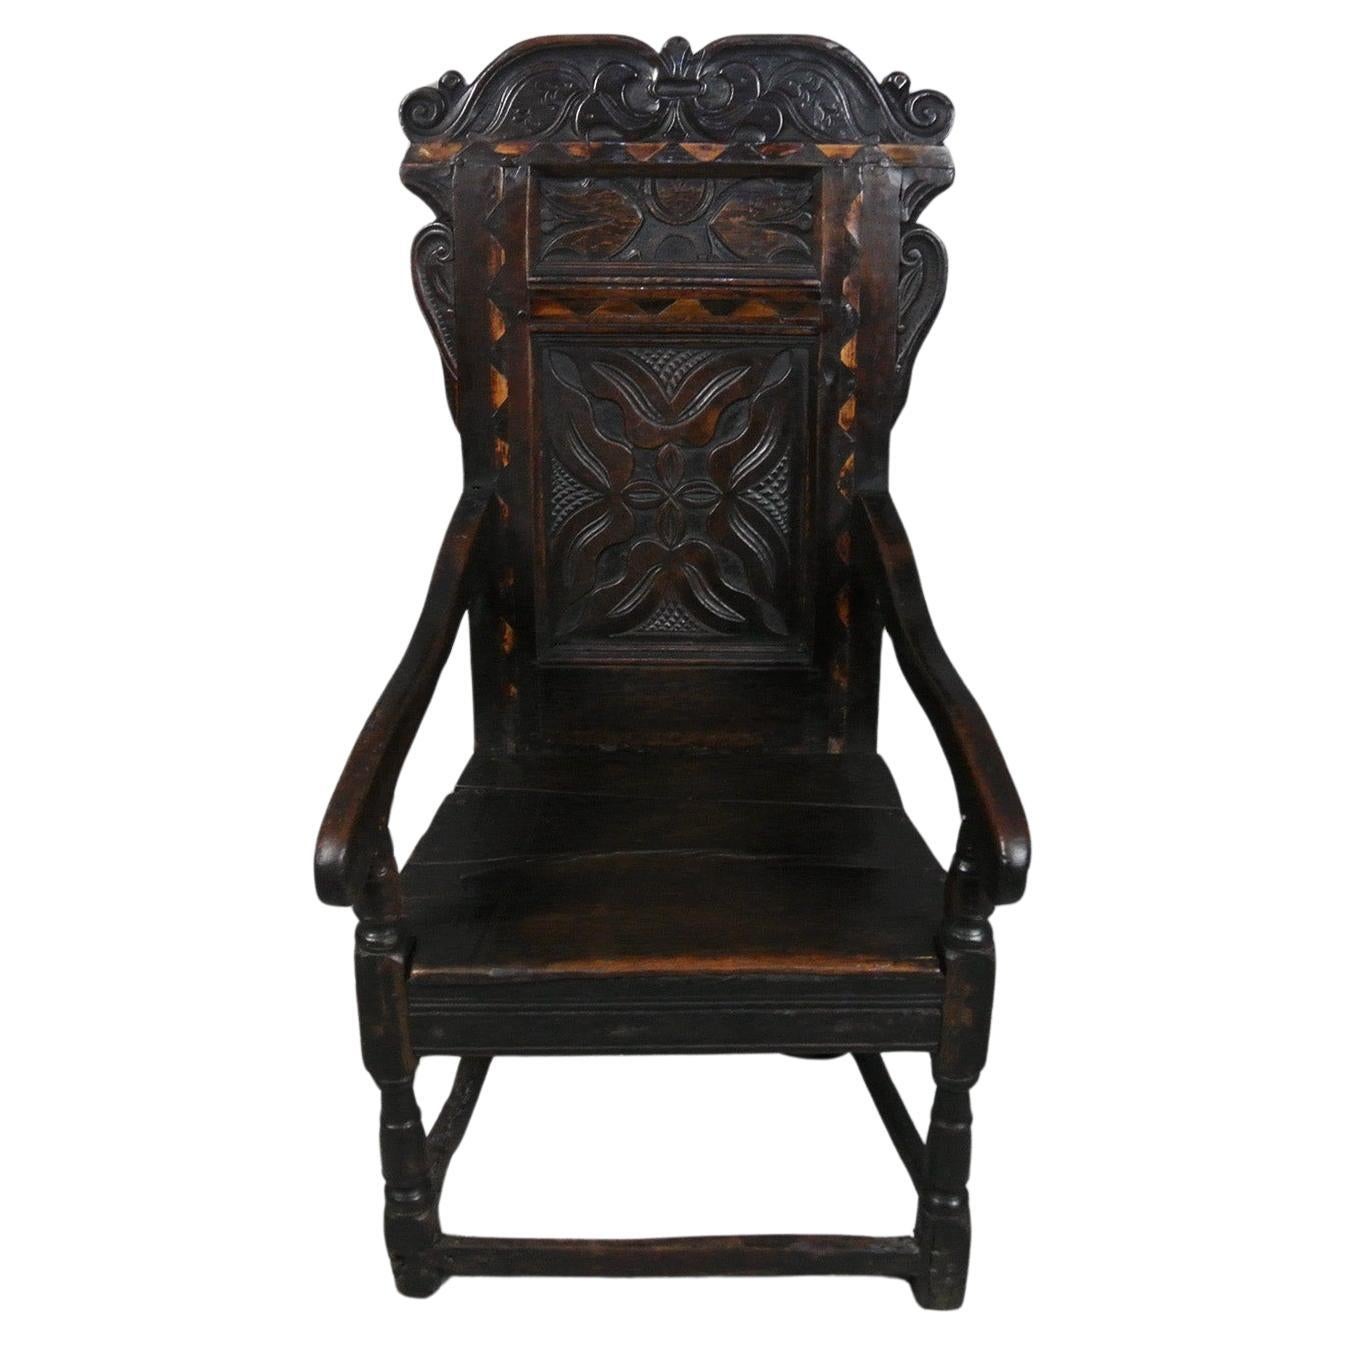 English Oak ‘Great Chair’ inlaid with Holly and Bog Oak c. 1650